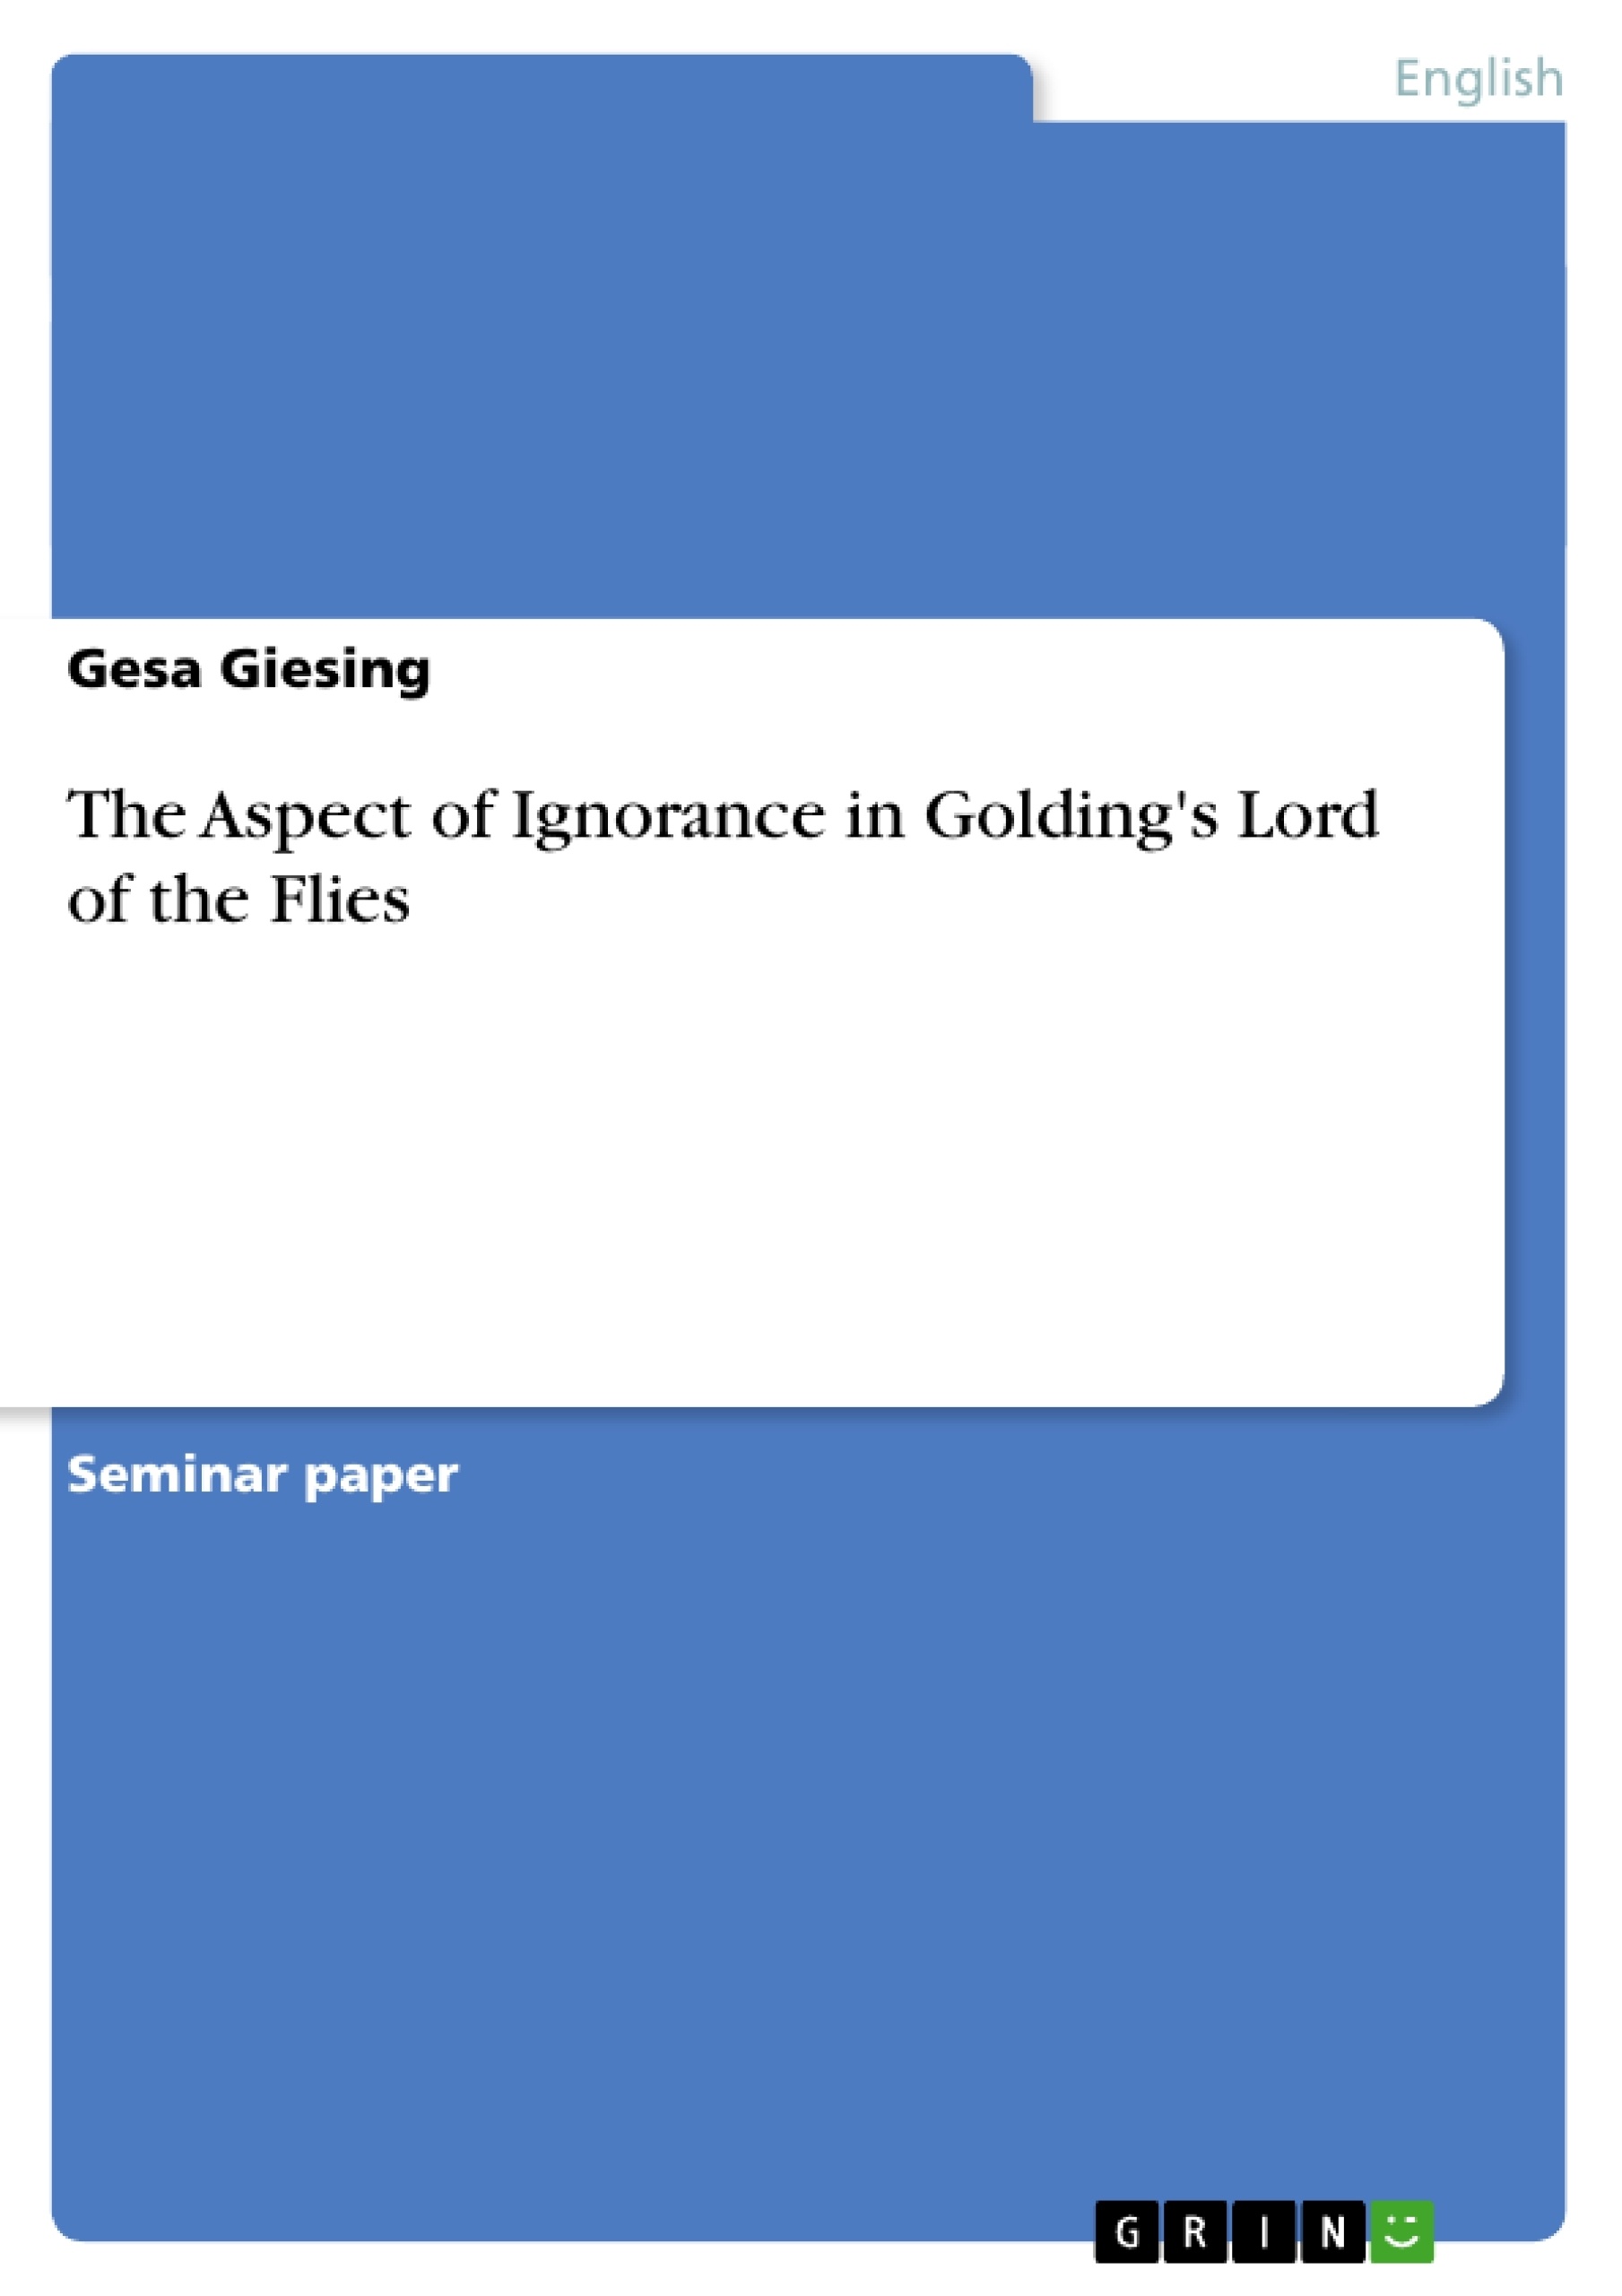 Title: The Aspect of Ignorance in Golding's Lord of the Flies